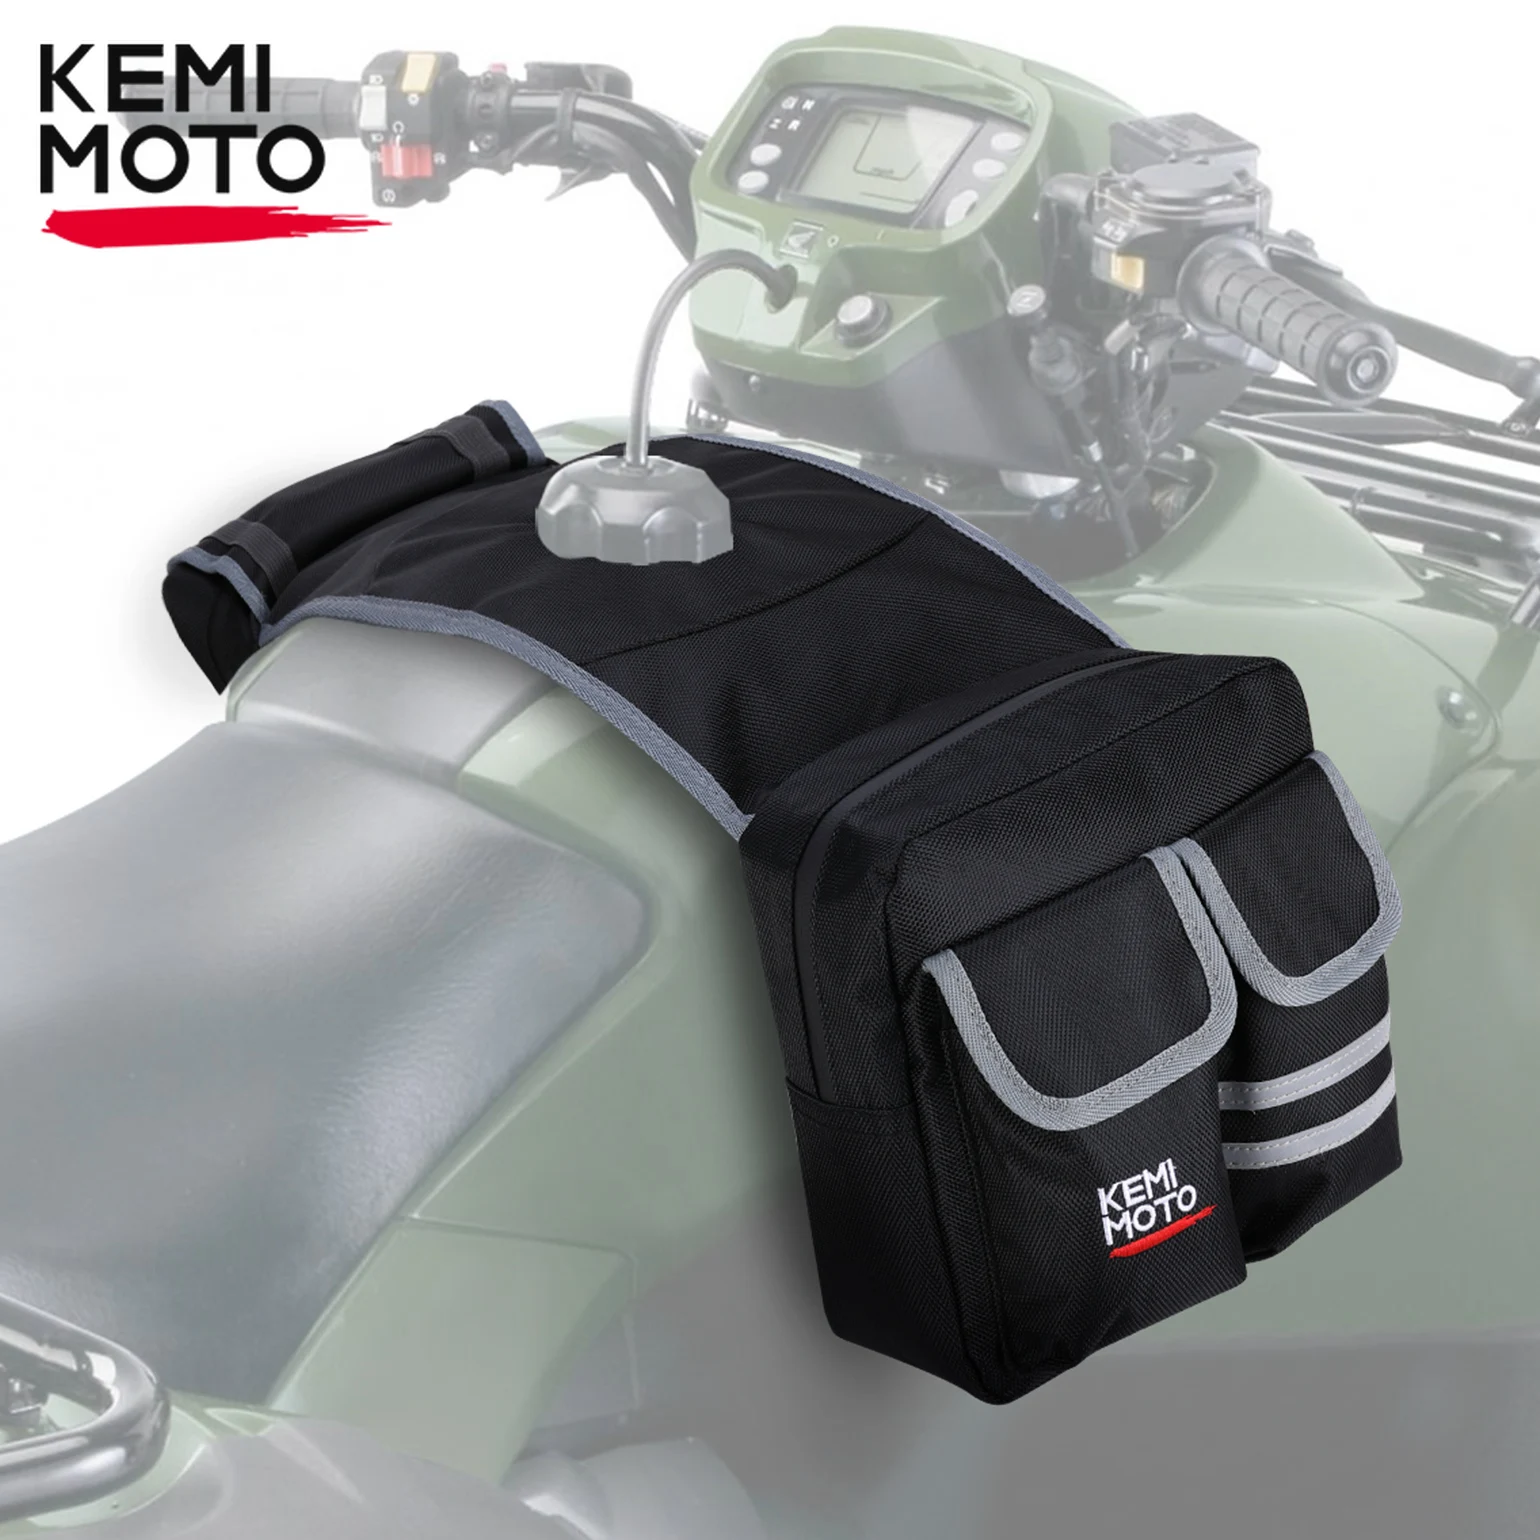 KEMIMOTO ATV Fuel Tank Bag Compatible with Polaris Sportsman XP 1000 500 800 for Can Am for Yamaha Raptor 700 700R for linhai